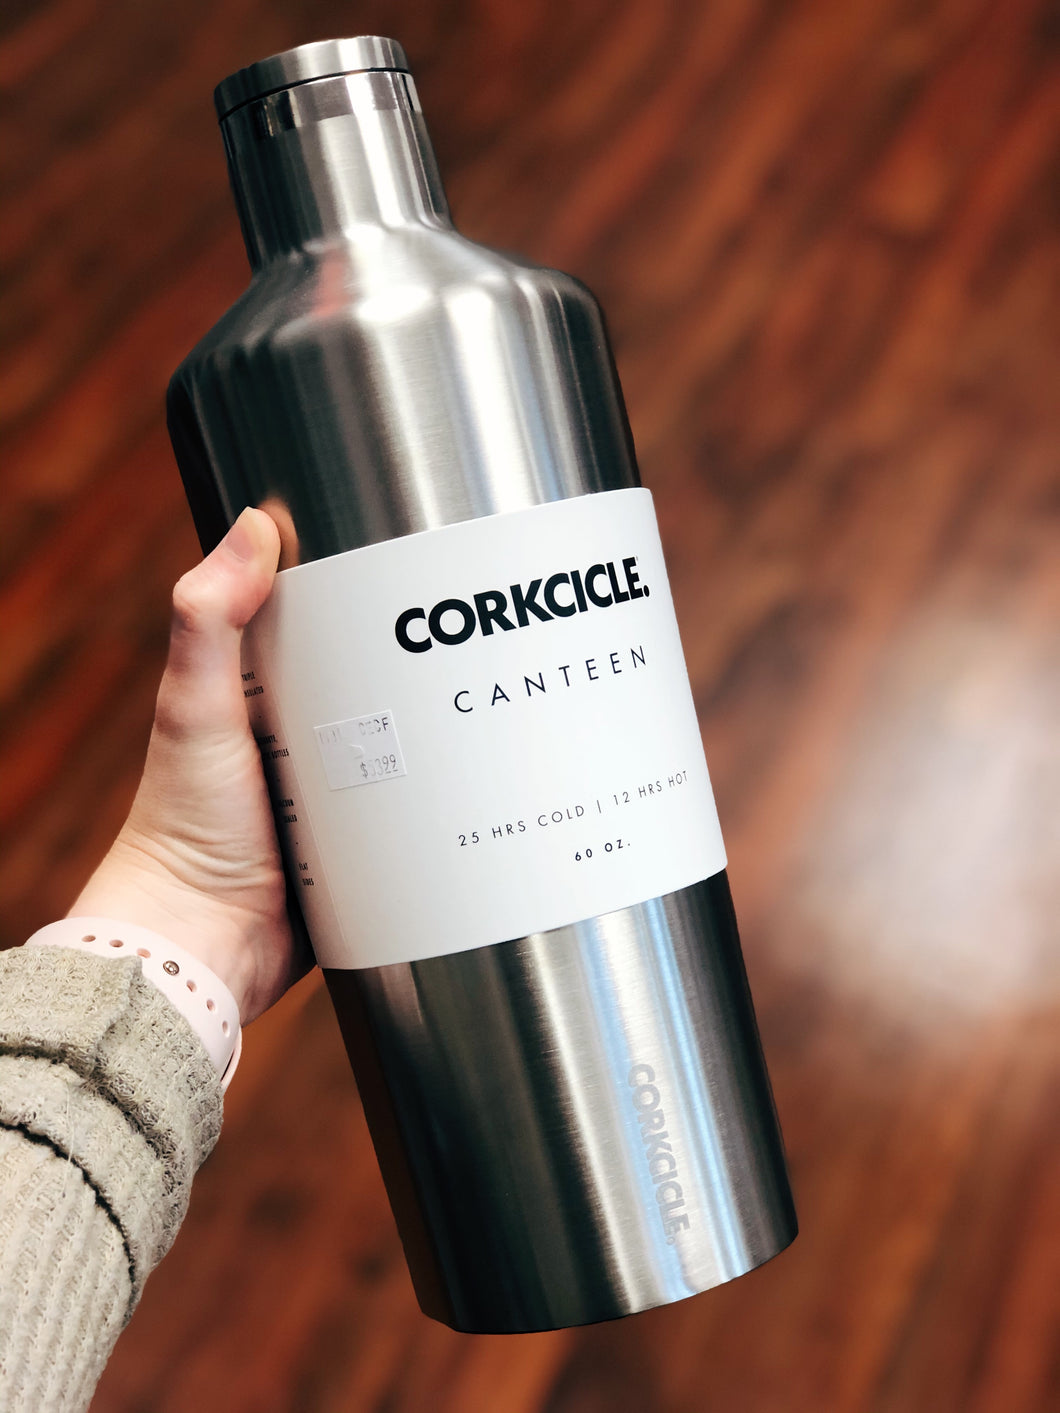 Corkcicle Large Canteen—60oz